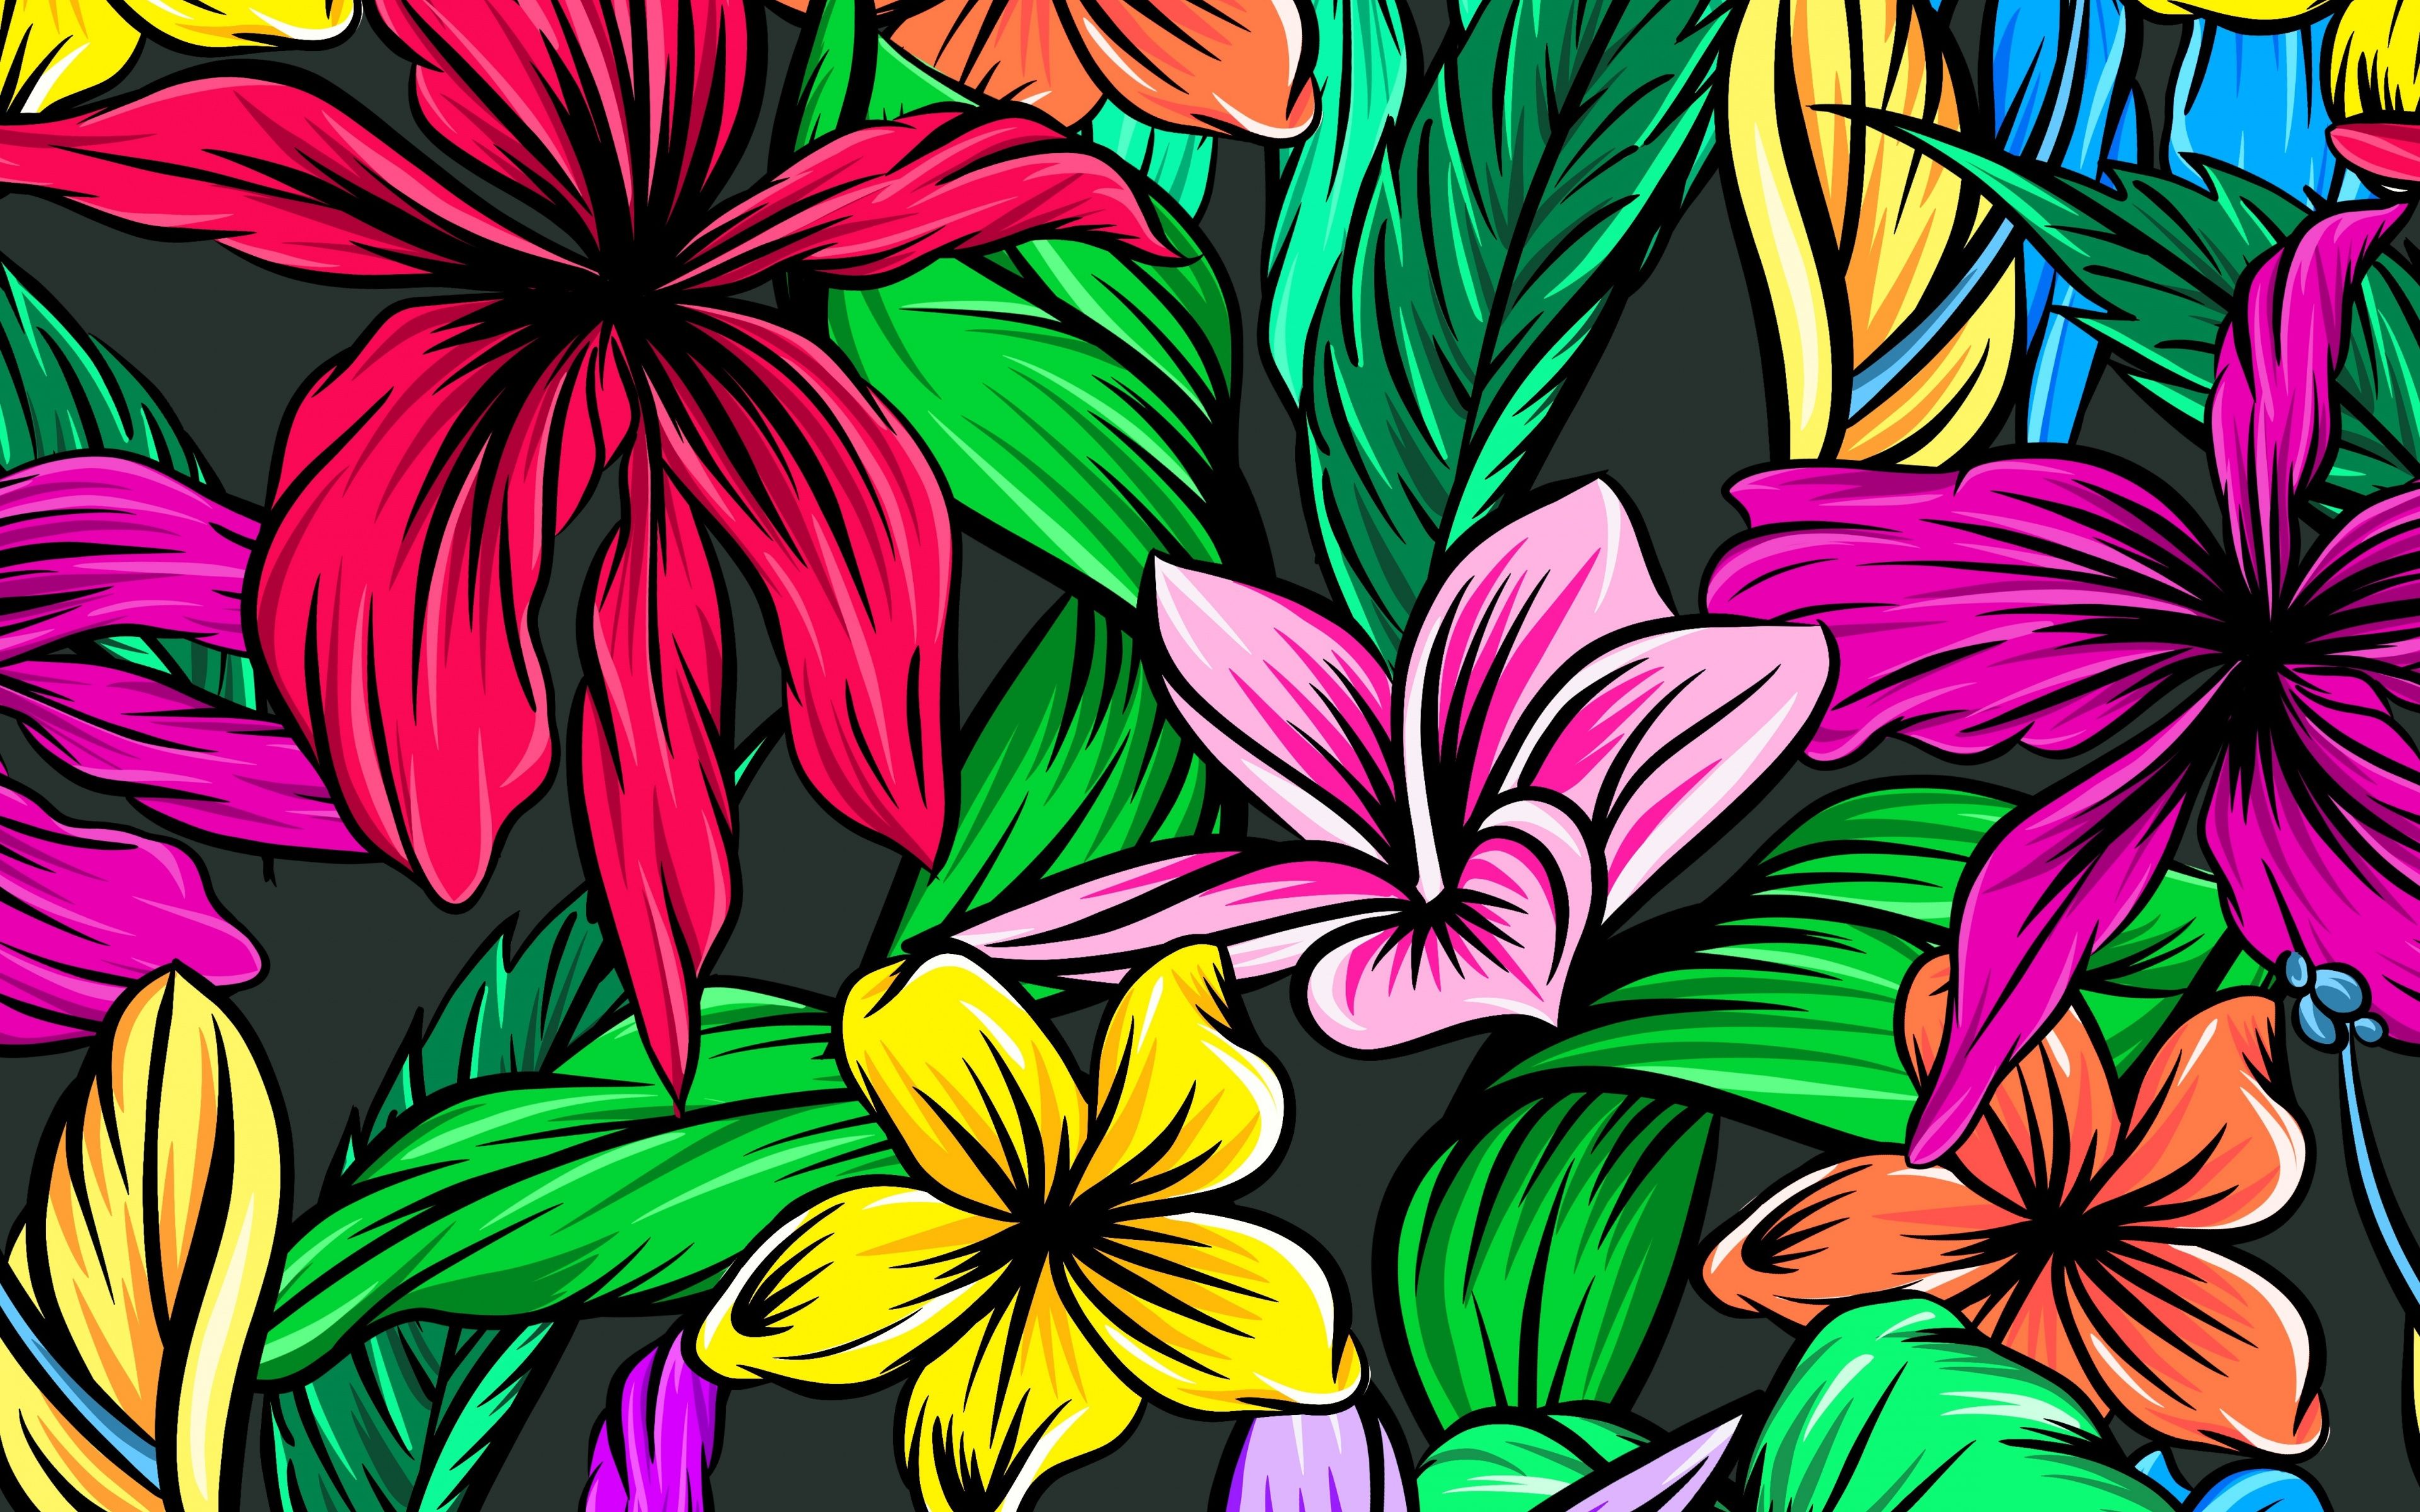 Abstract, colorful, flowers, digital art, 3840x2400 wallpaper. Flower art painting, Abstract, Decorative art prints